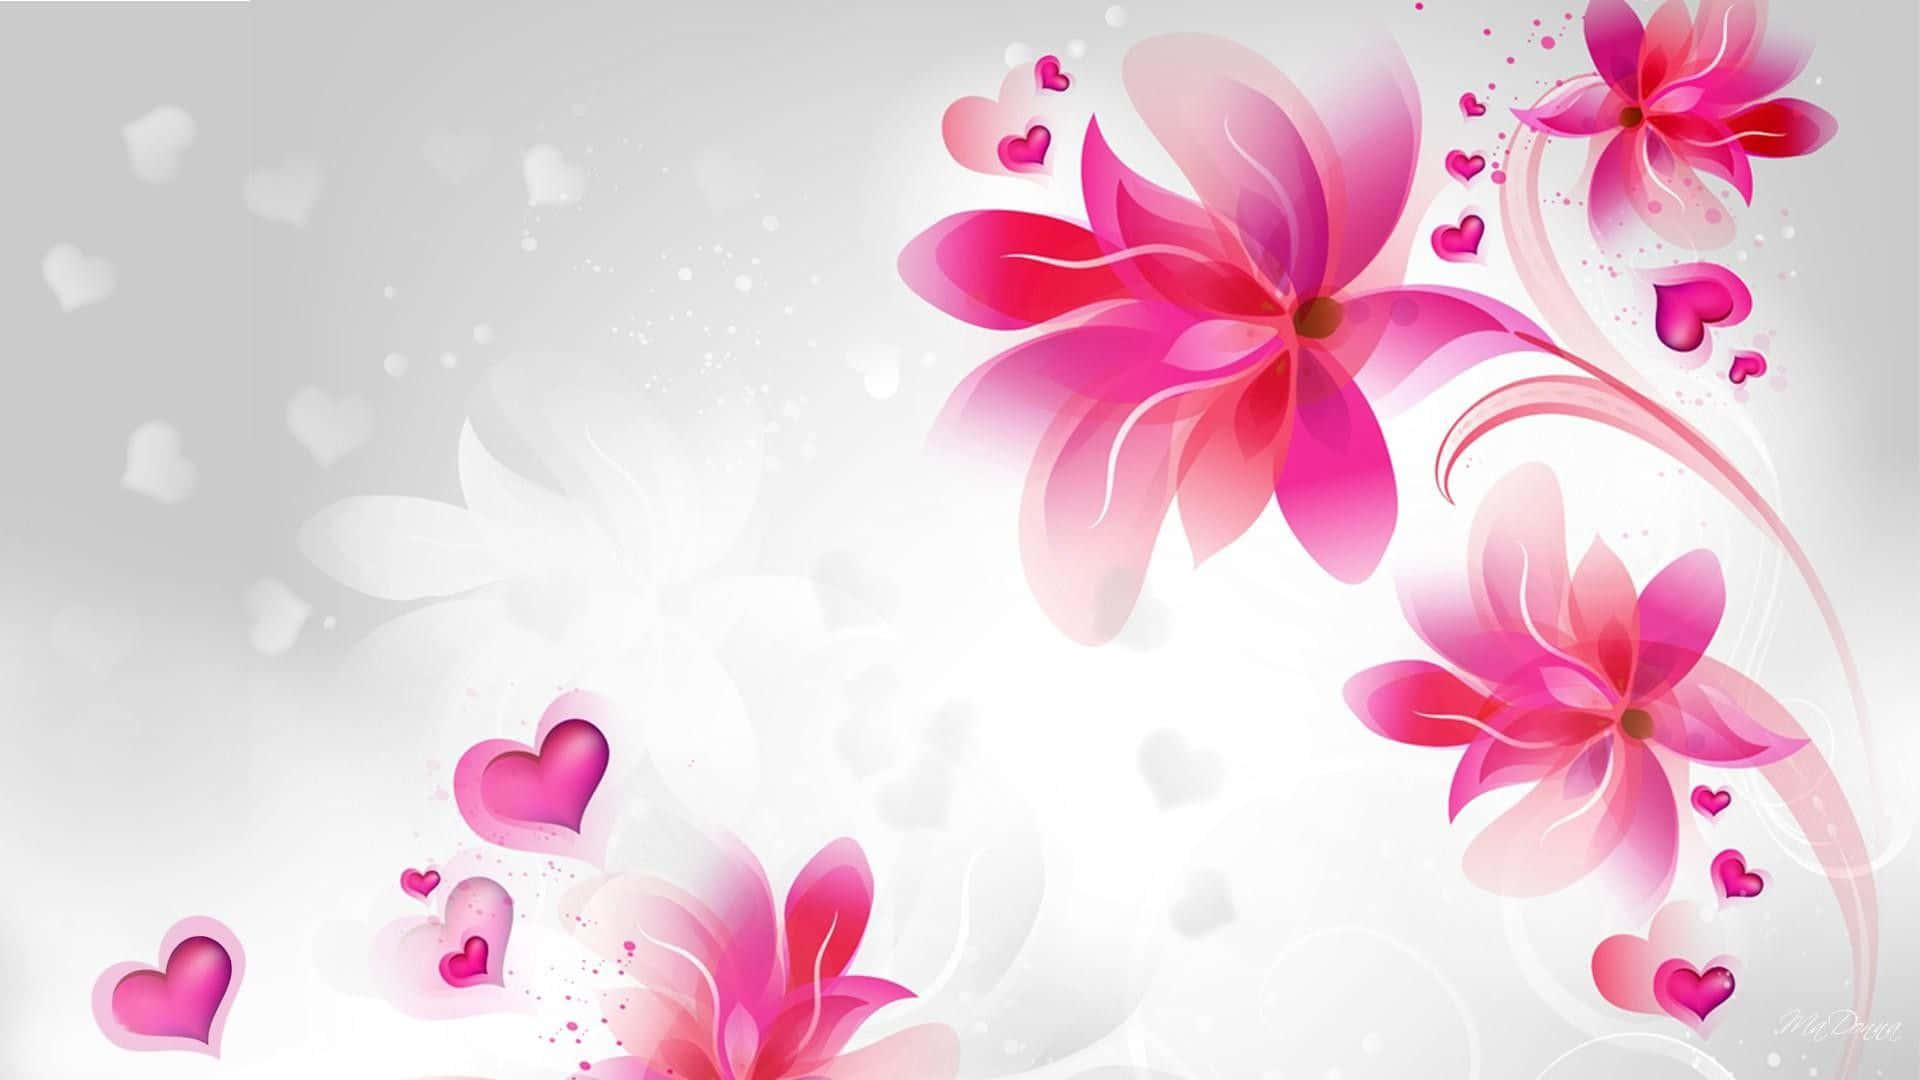 Pink Flowers With Hearts On A White Background